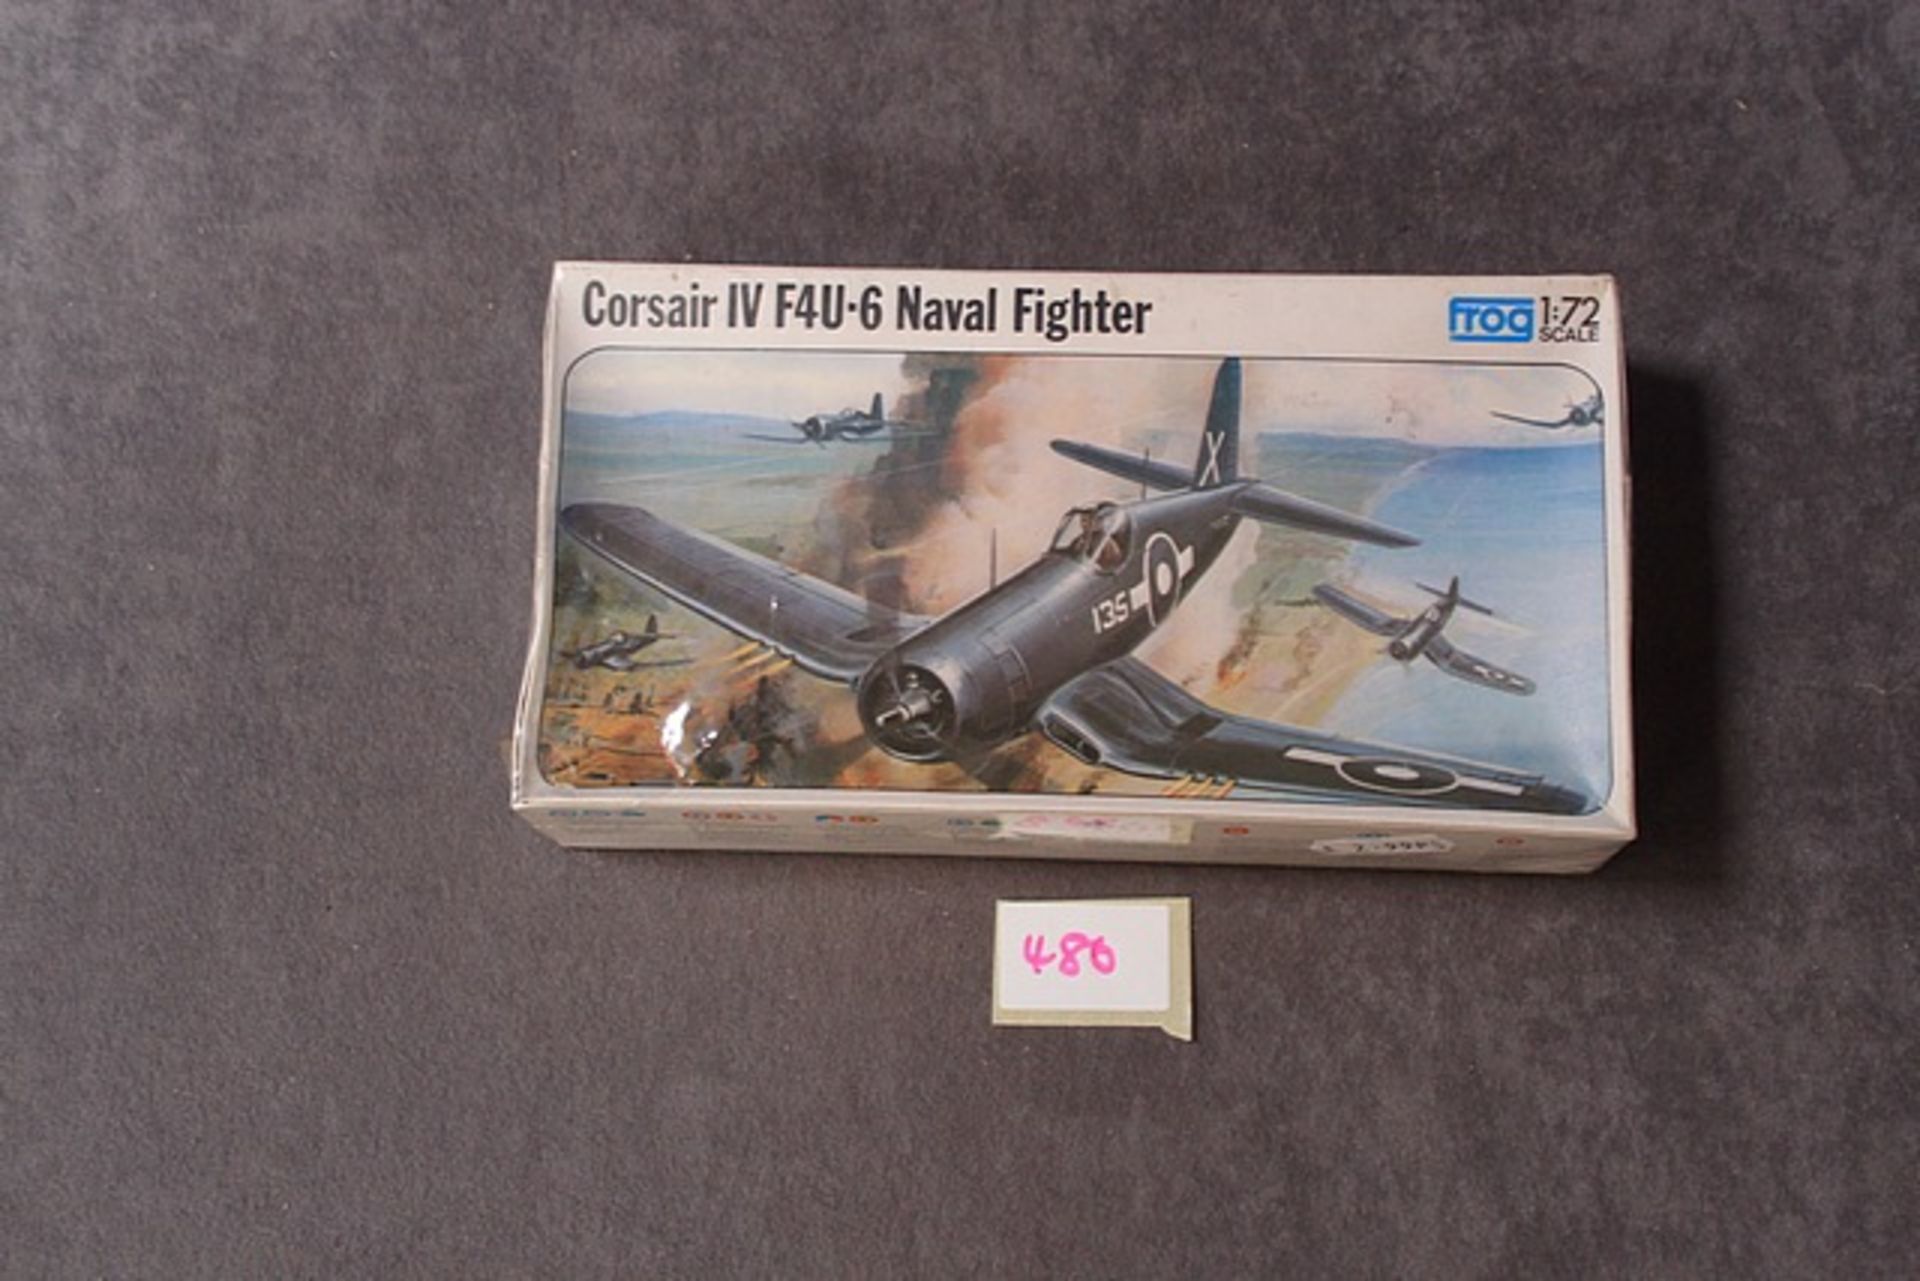 Frog Authentic Scale 1/72 Models Cat NoF243 Corsair IV F4U-6 Naval Fighter still sealed in box